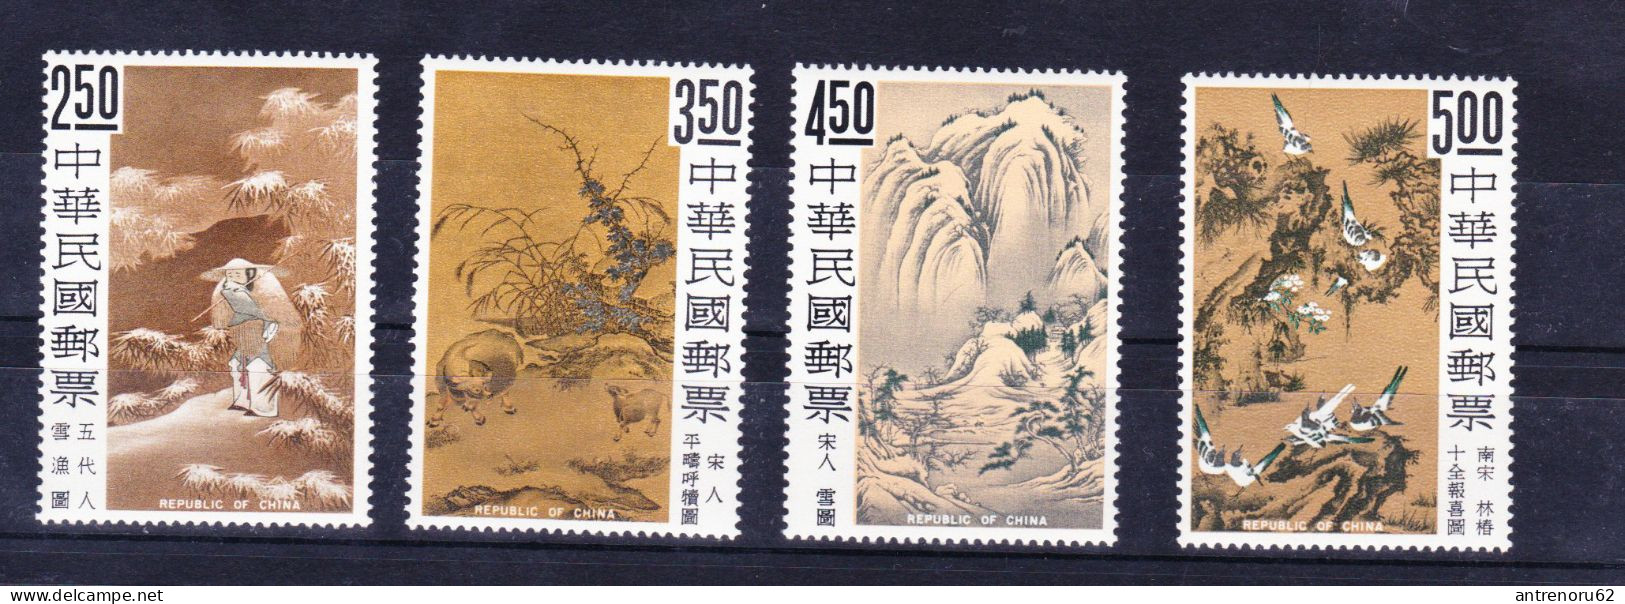 STAMPS-1966-CHINA-UNUSED-SEE-SCAN-TAIWAN-MNH**-LUXE - Nuevos